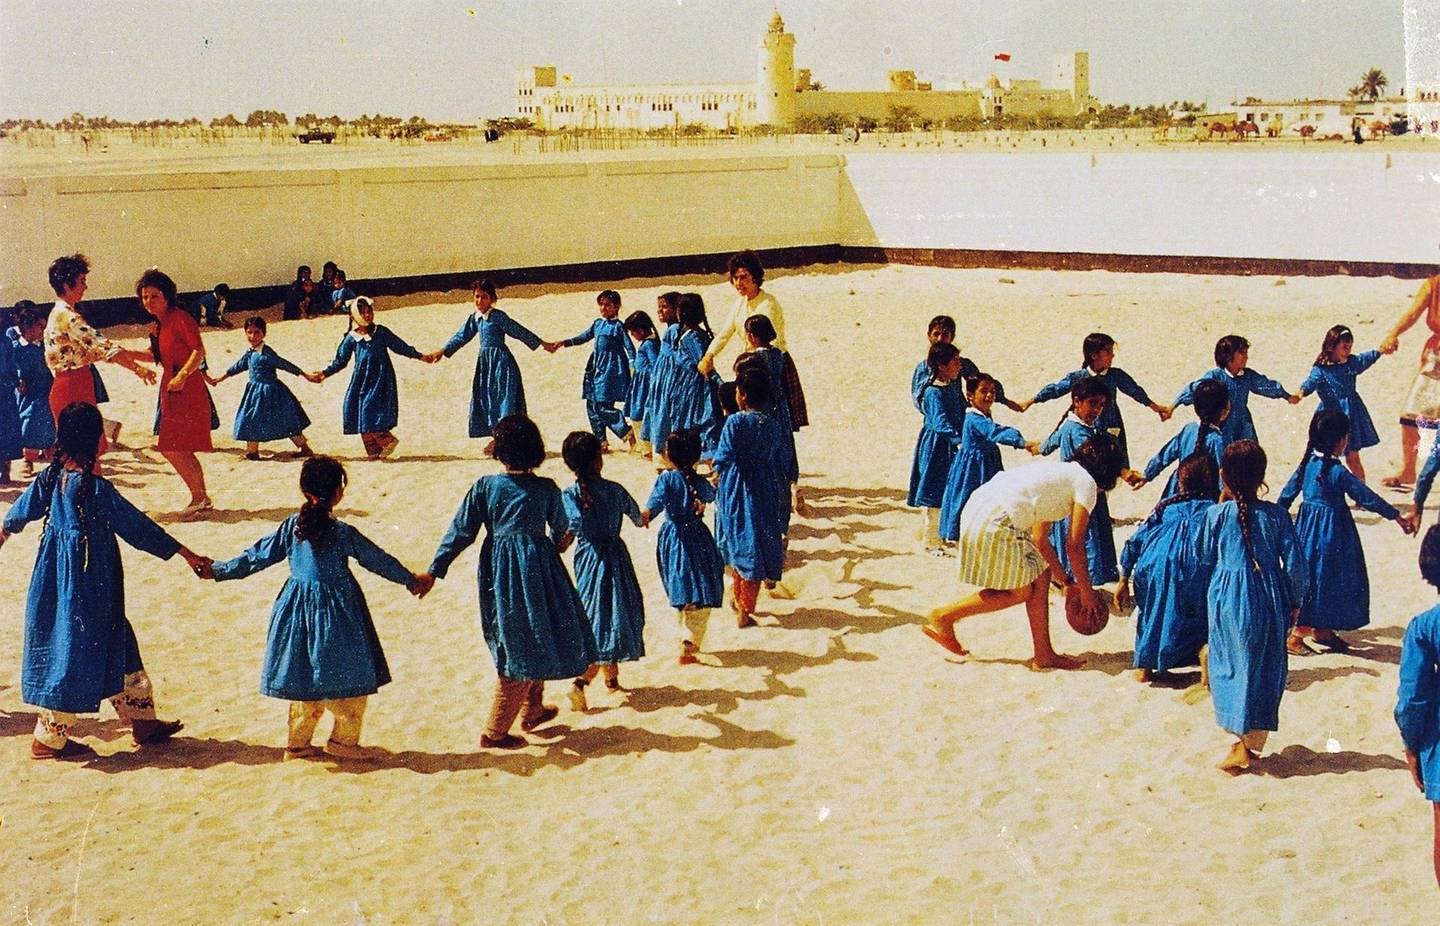 Pupils playing at the first girls school in Abu Dhabi which opened around 1963 near Qasr Al Hosn.